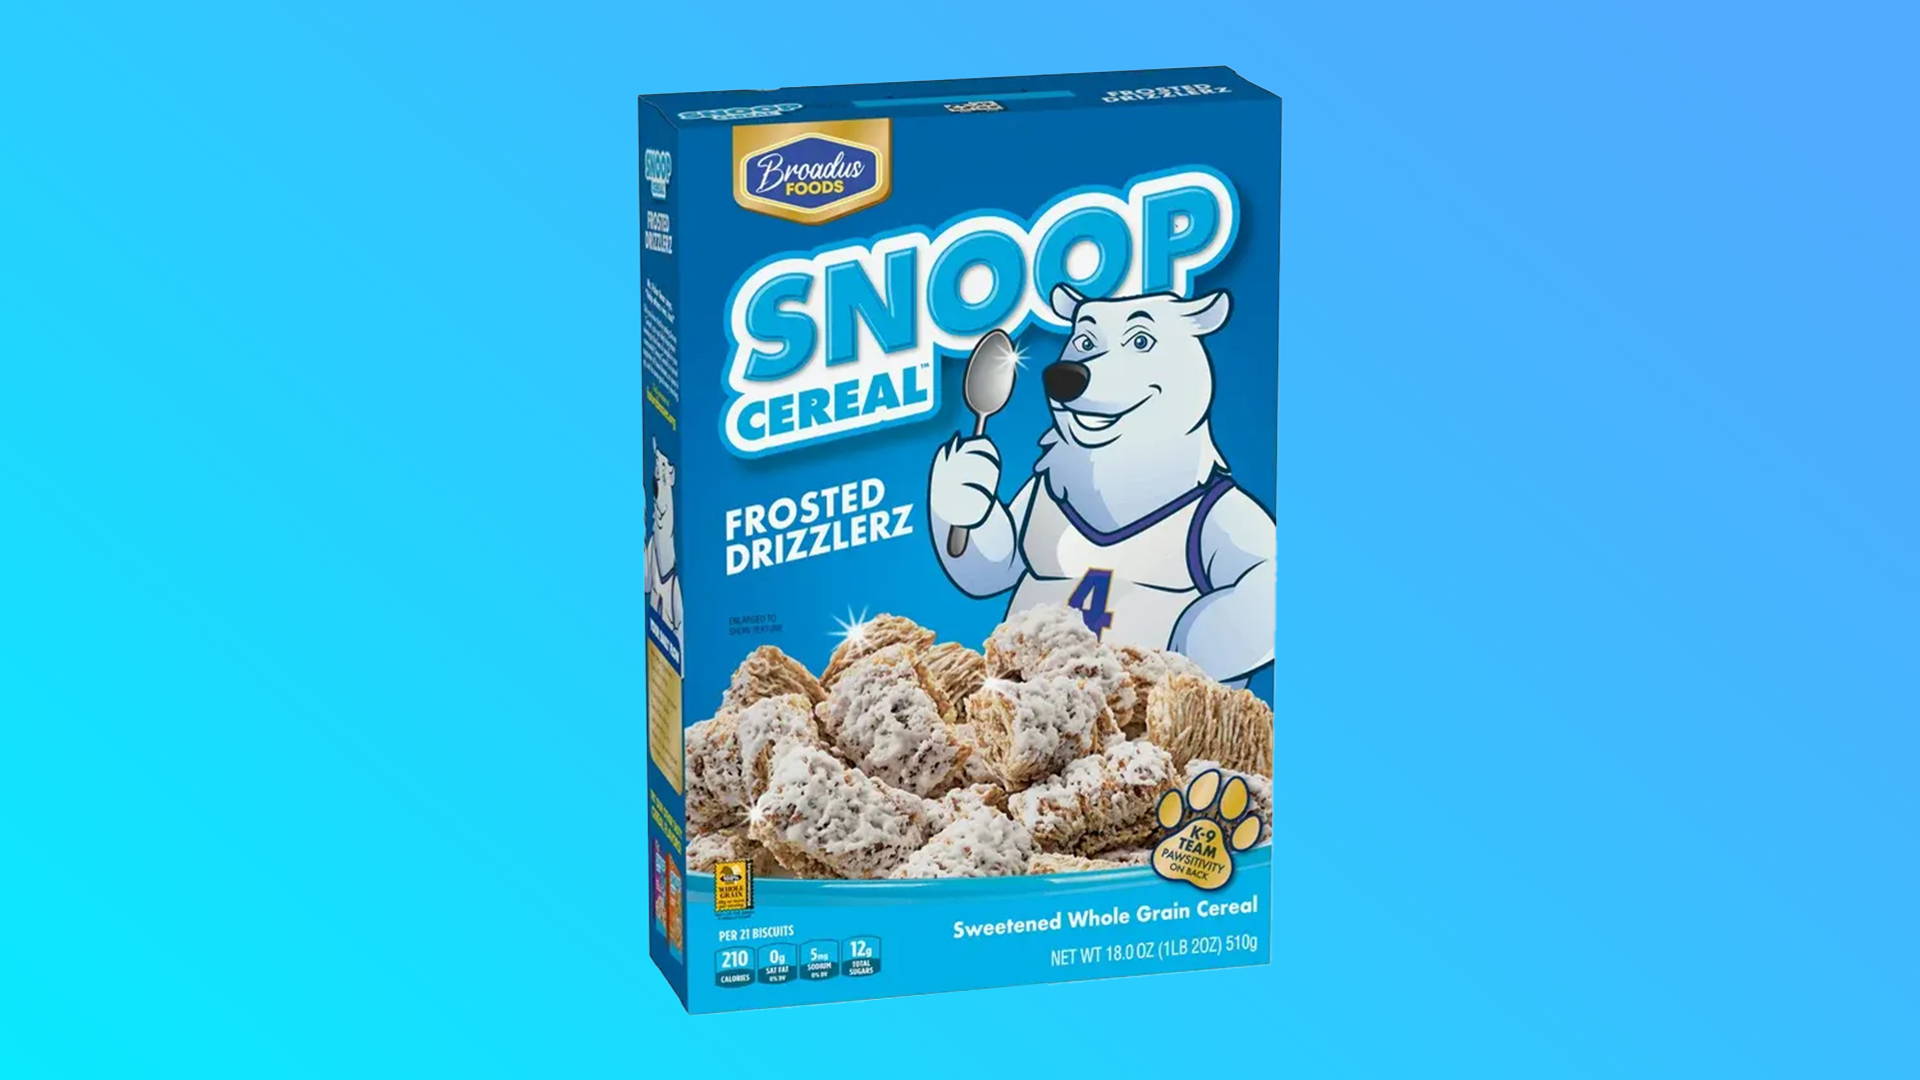 Featured image for Snoop Dogg and Master P File Lawsuit Alleging Post and Walmart Intentionally Kept Snoop Cereal off Shelves